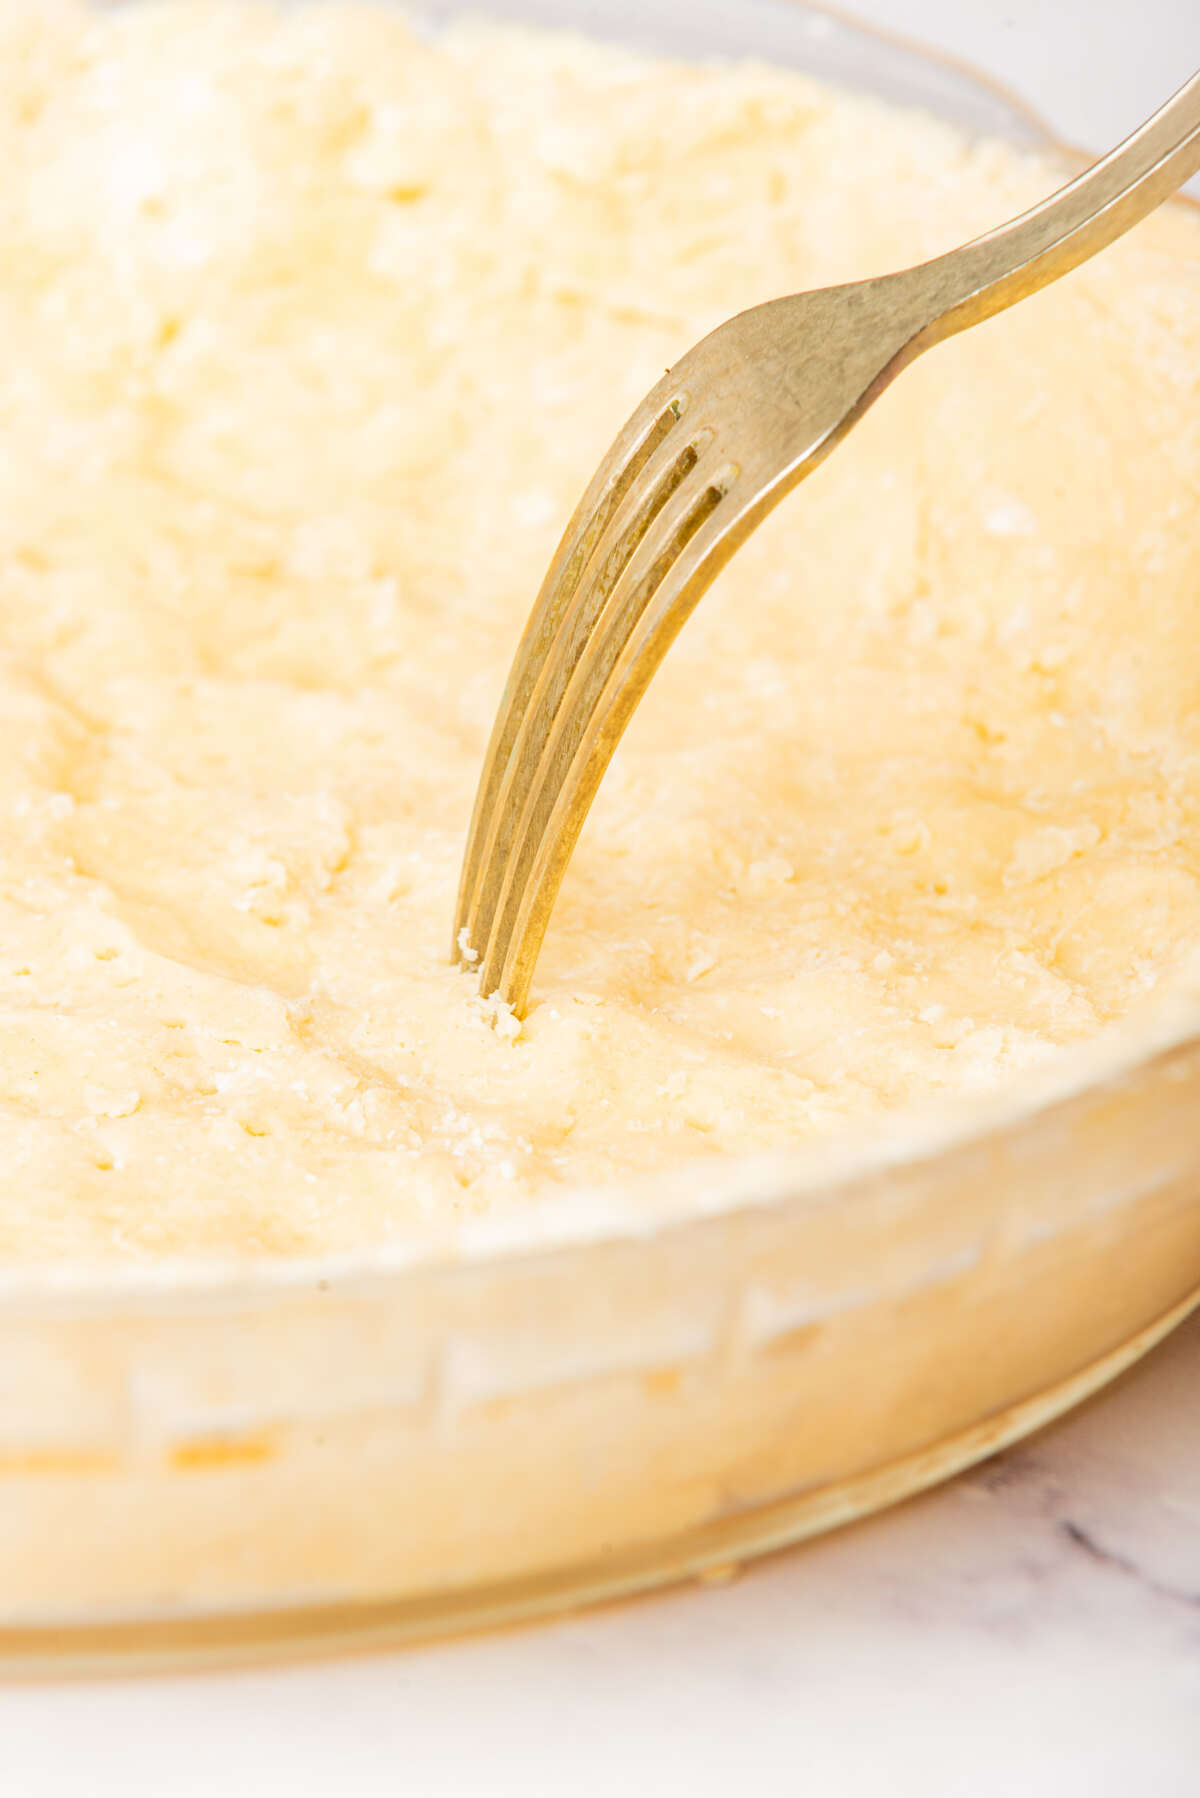 A pie crust being pricked with a fork in a glass pie dish, ensuring even baking.